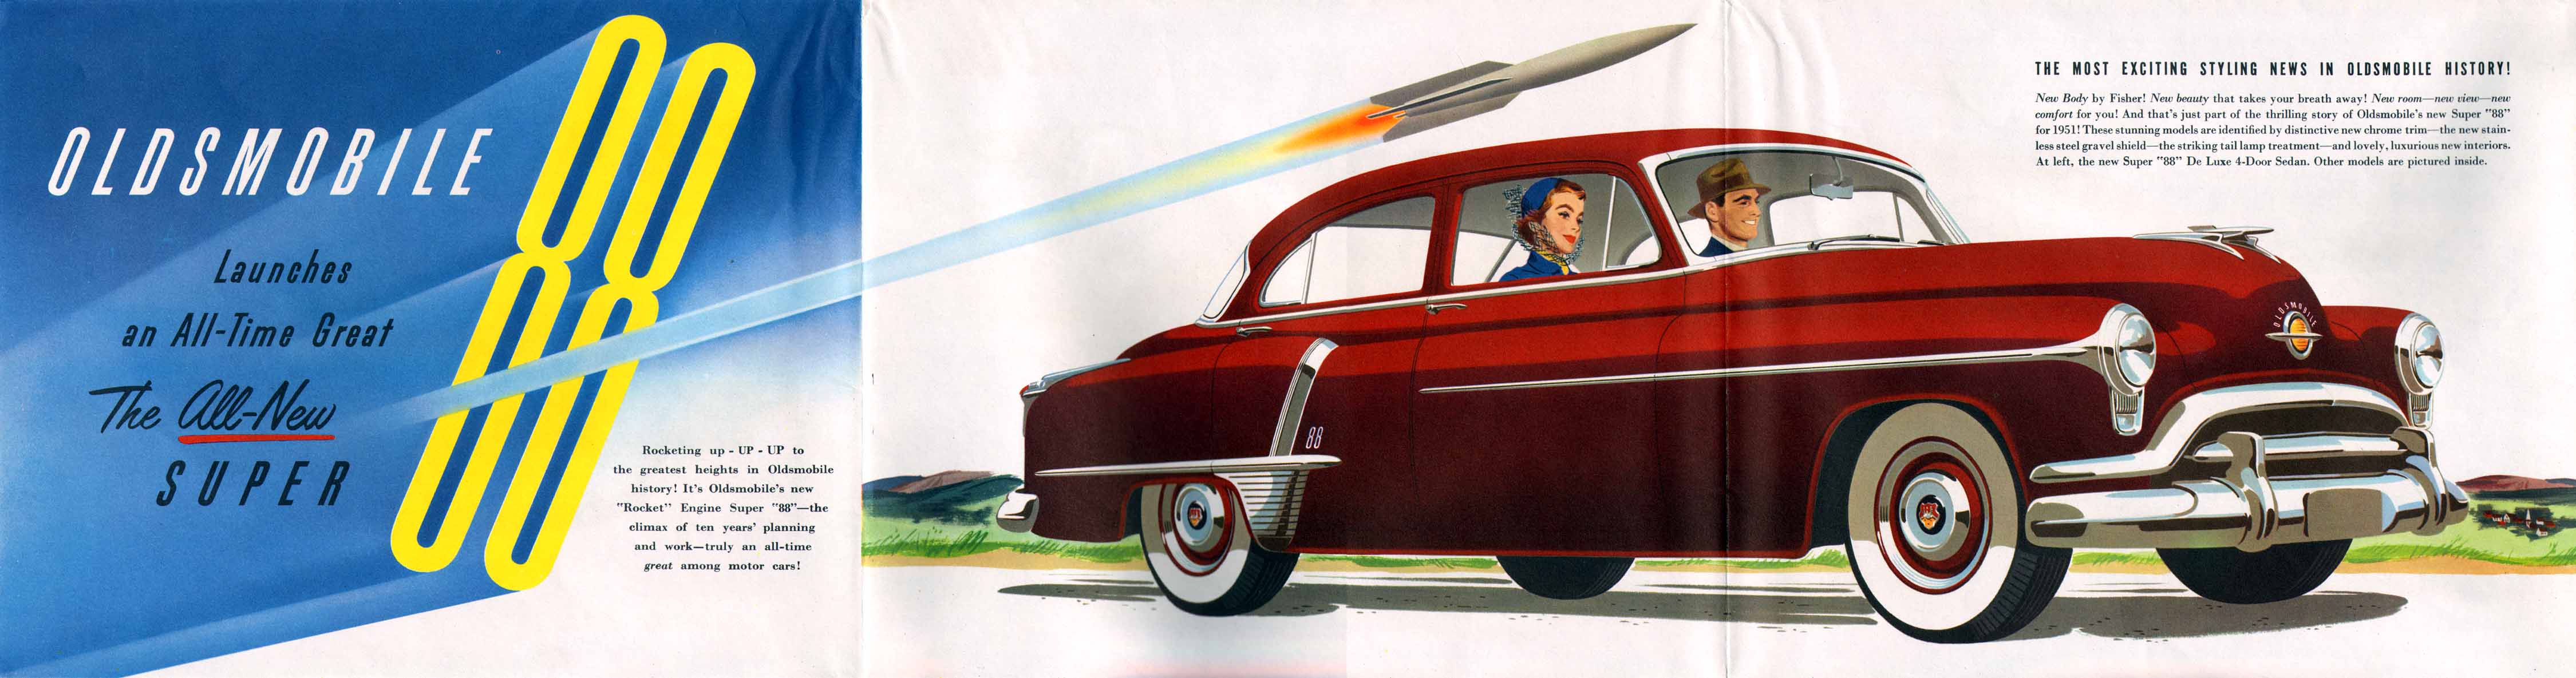 1951 Oldsmobile Motor Cars Foldout Page 3